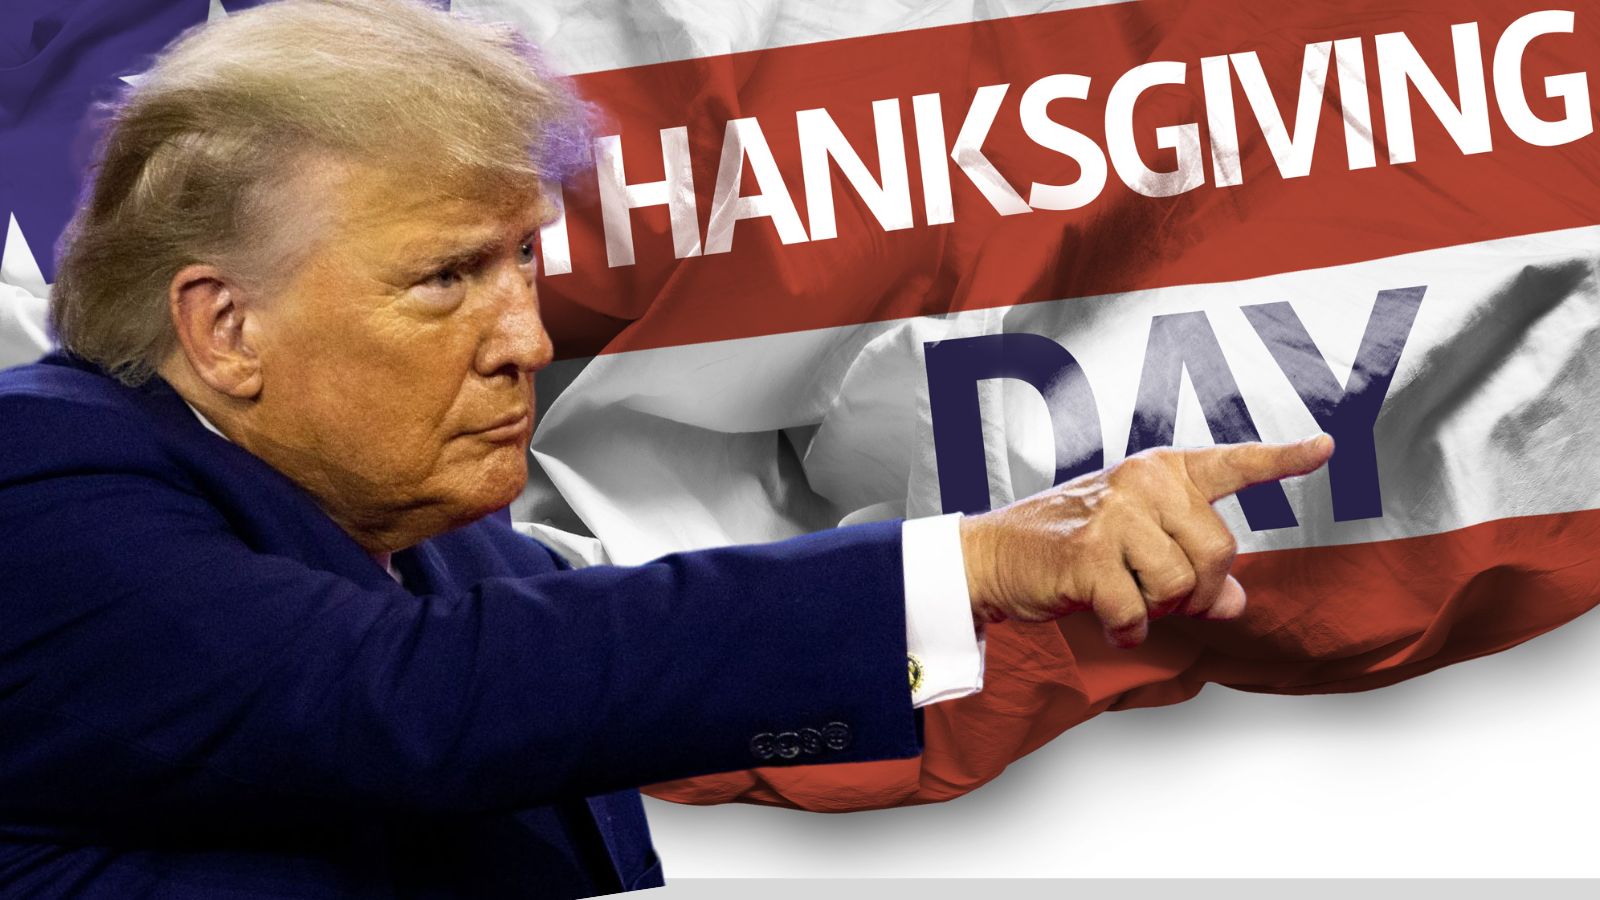 ​​”How Can Any Christian Vote for This Guy?”: Trump’s Thanksgiving Tirade Splits Nation